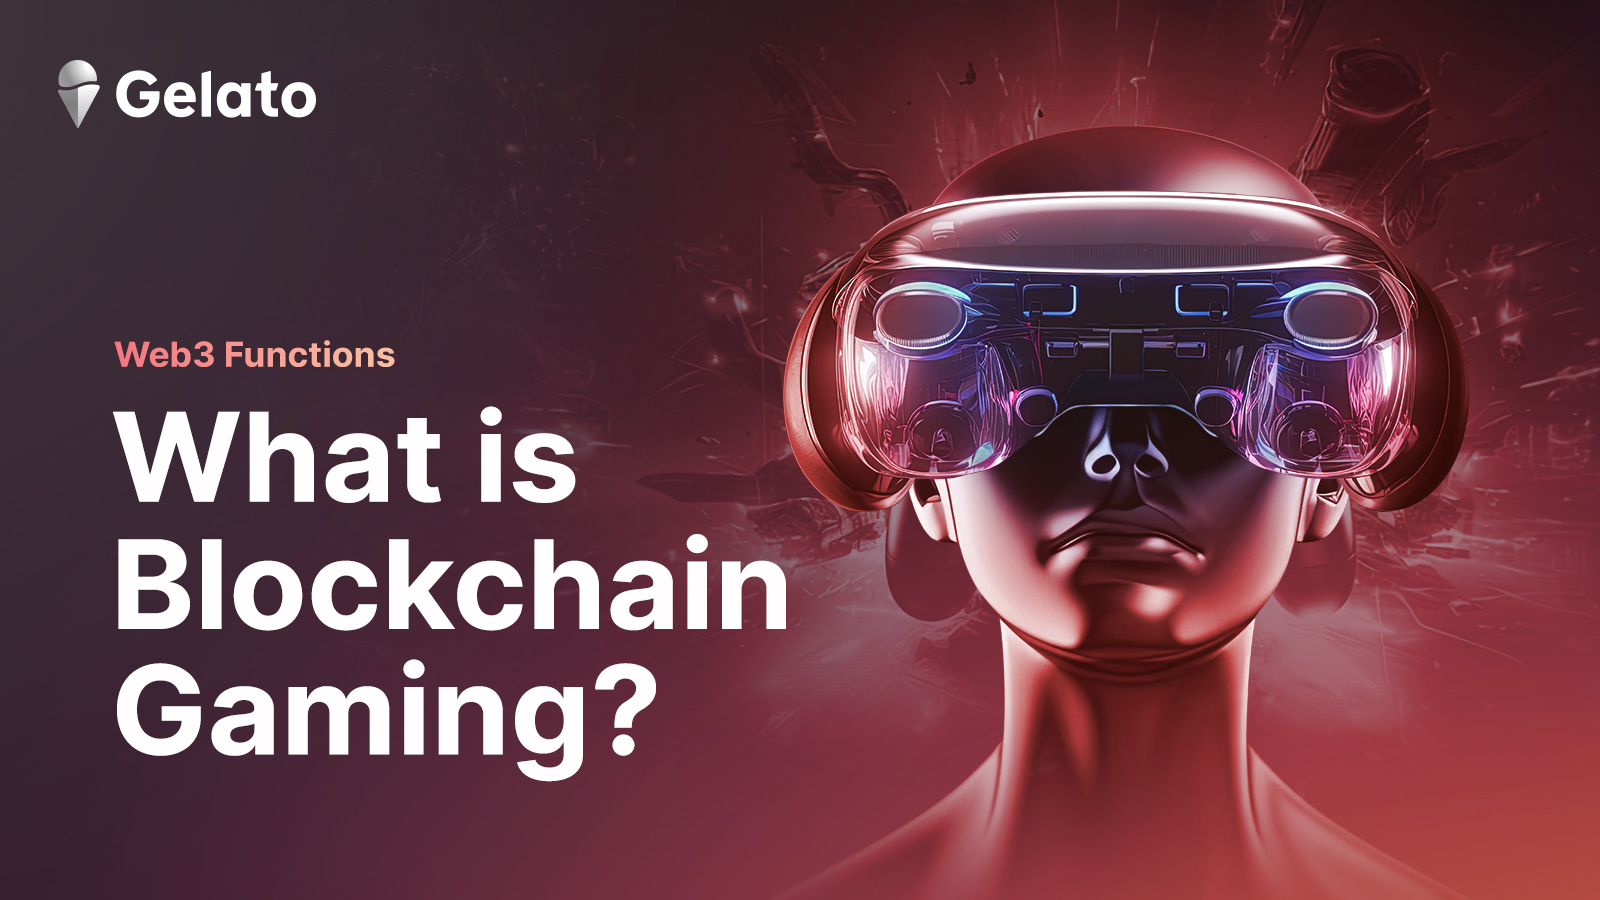 What is Blockchain Gaming?